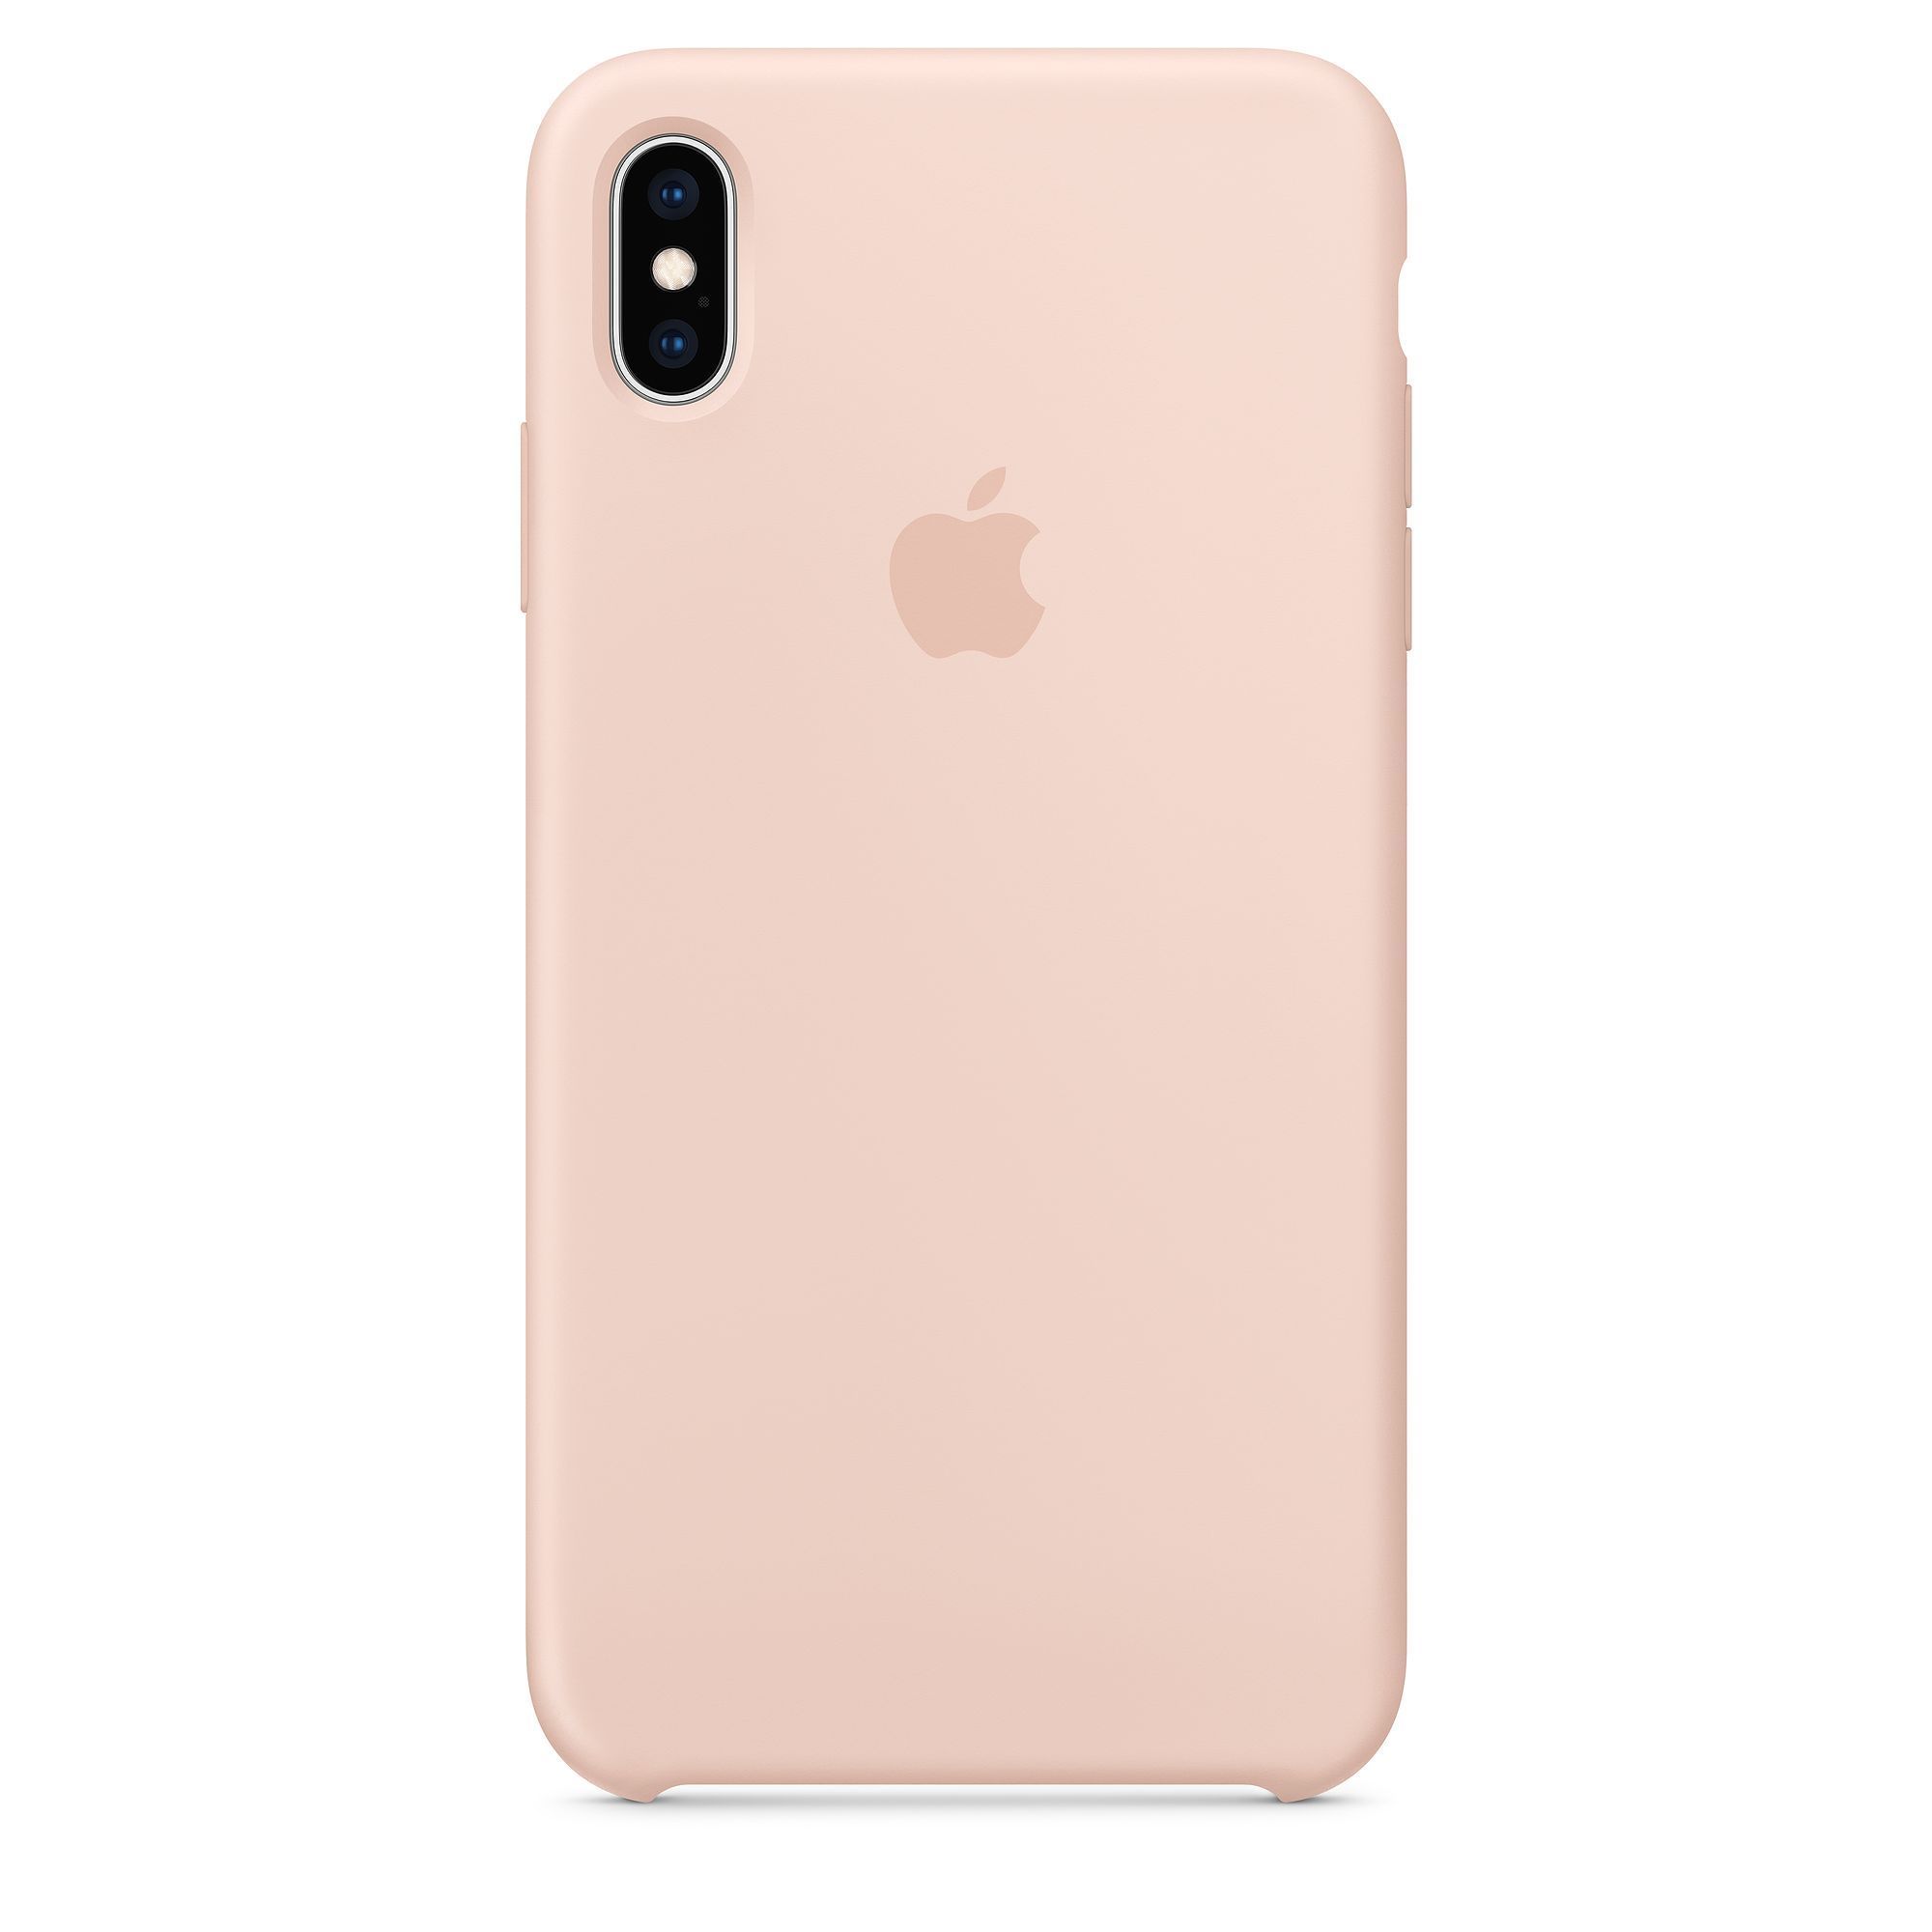 Apple Silicone Case iphone XR. Iphone XS Max Silicone Case. Чехол Silicone Case iphone XR. Iphone XS Max чехол Apple.